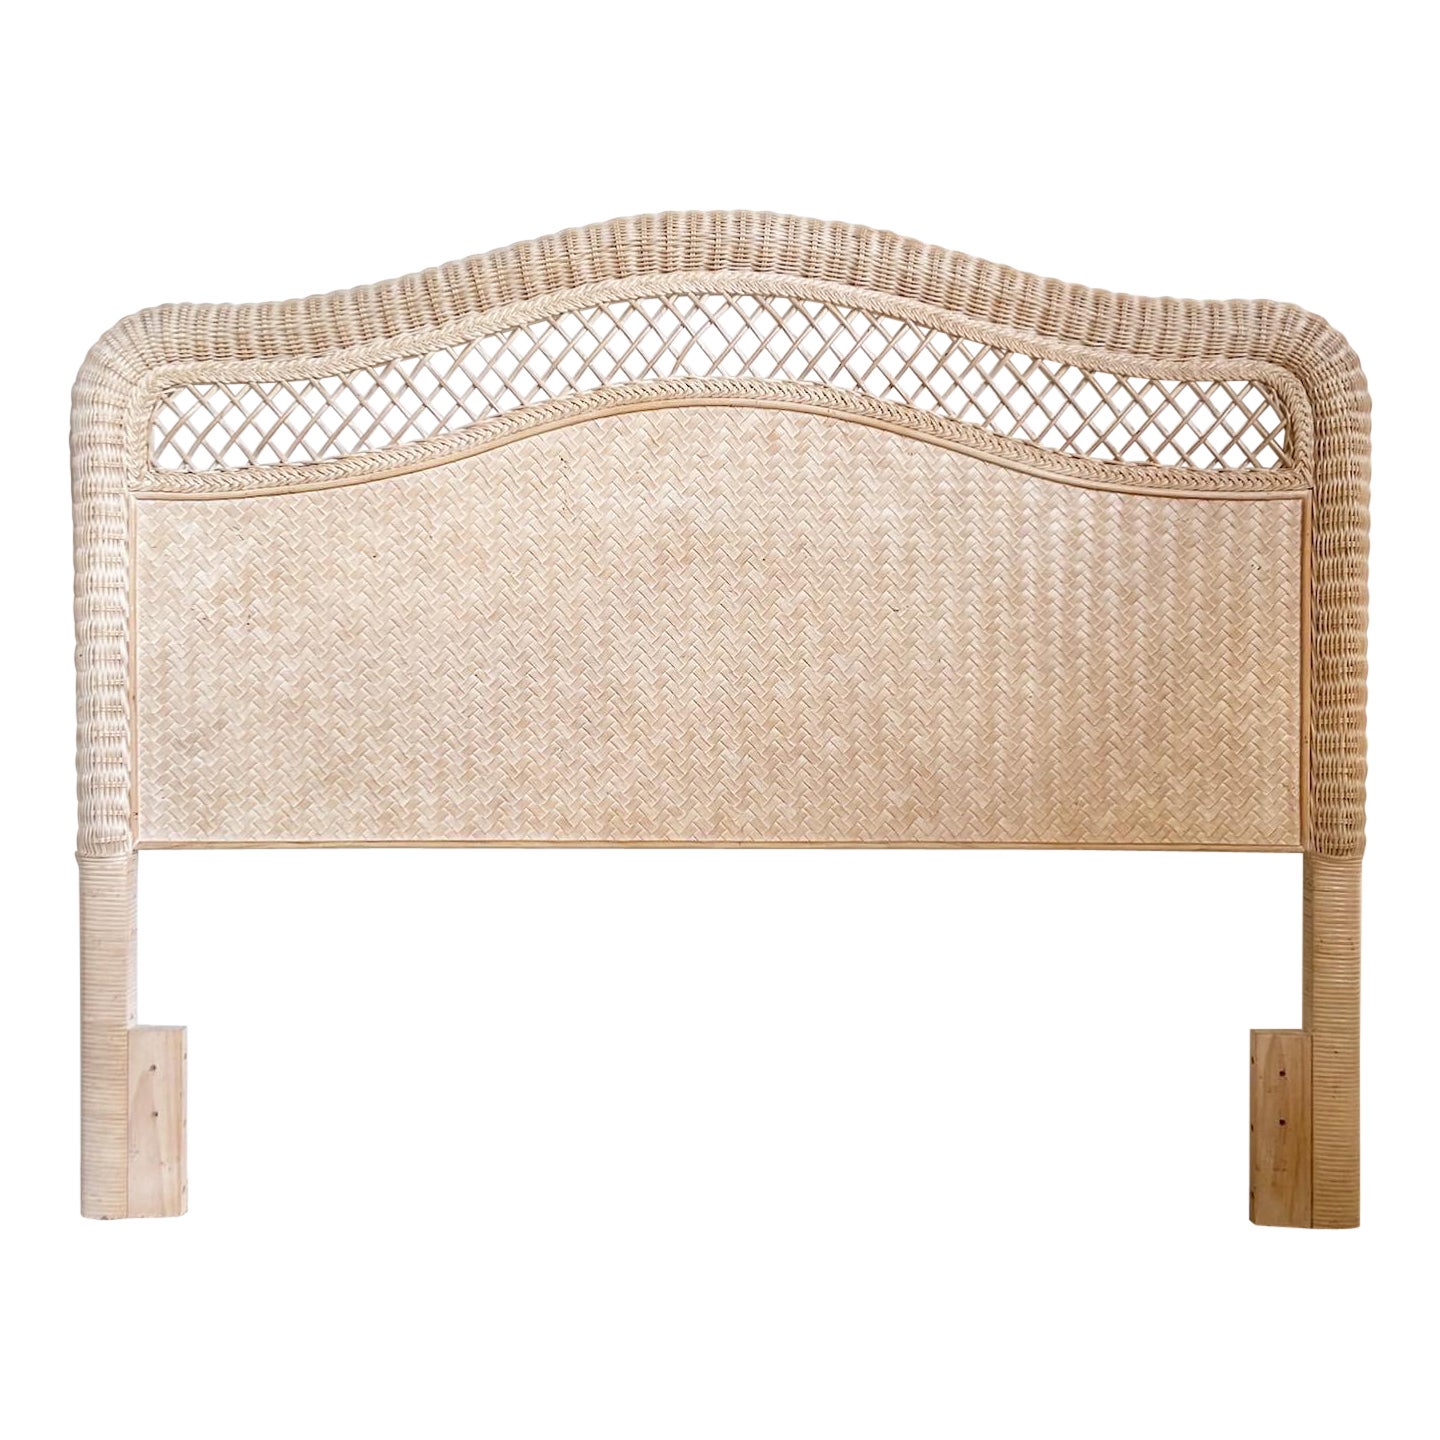 Boho Chic Rattan and Wicker Queen Headboard For Sale